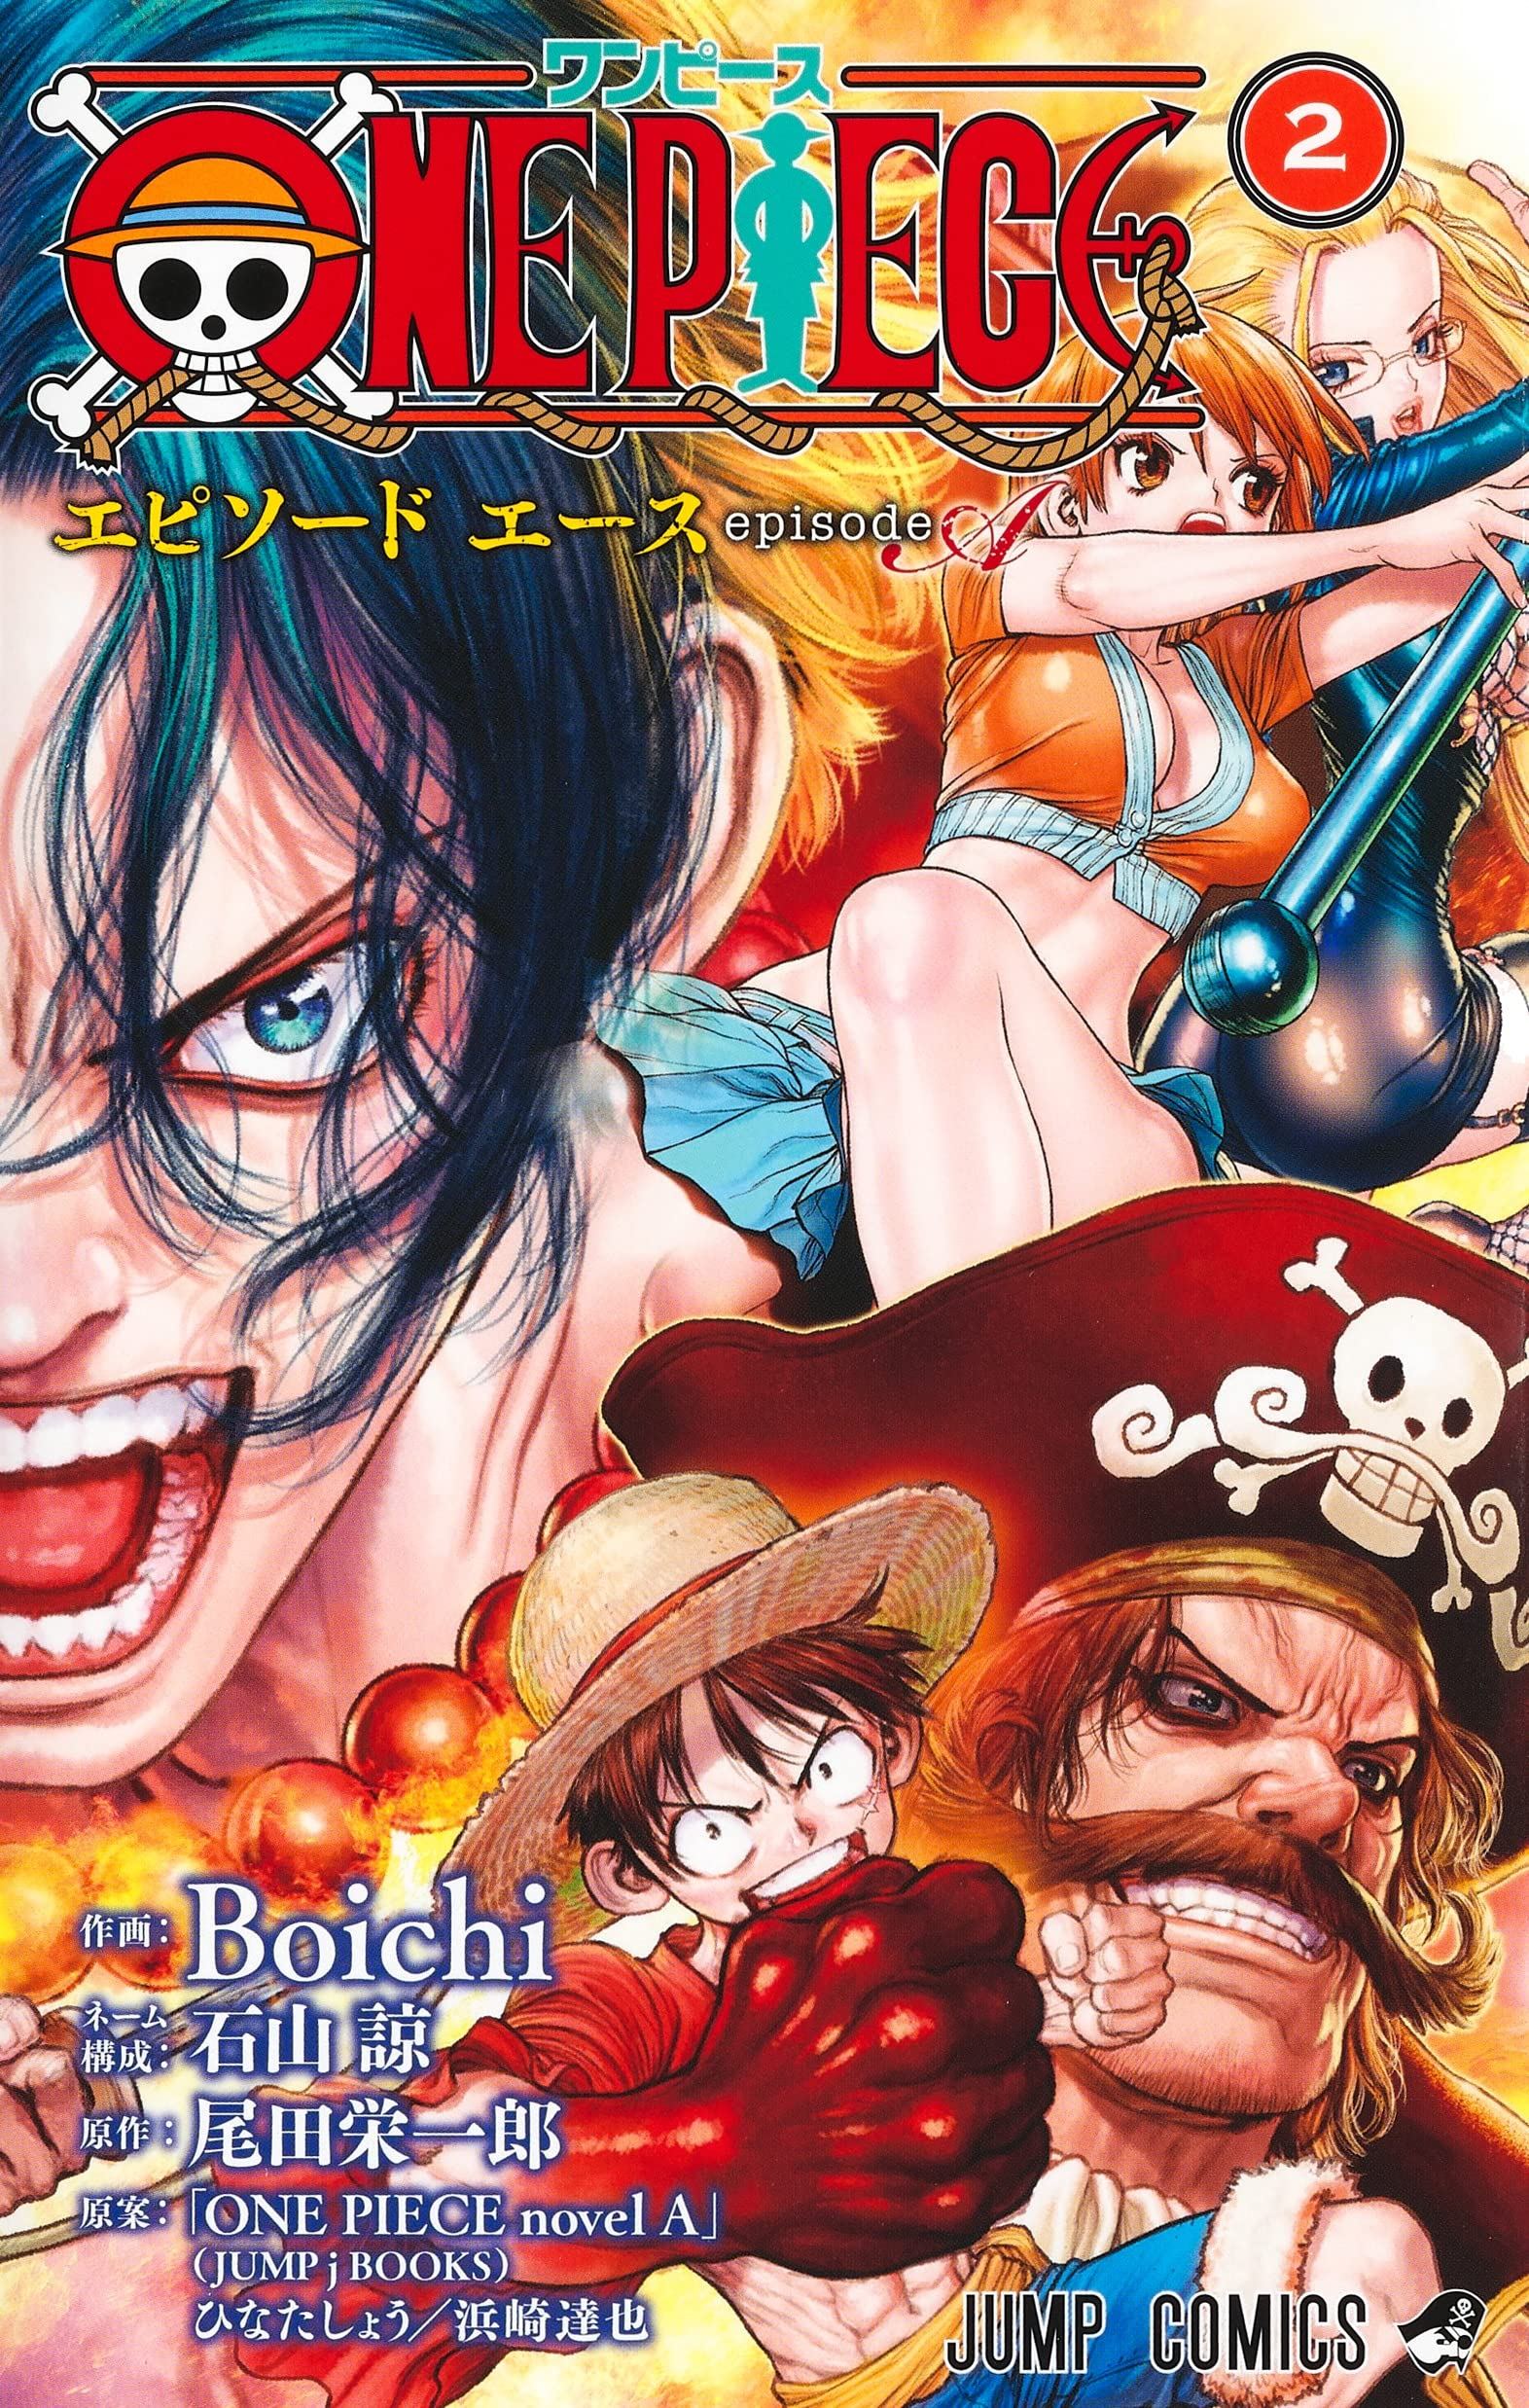 One Piece Episode A 2 Comic Book - Bitcoin & Lightning accepted